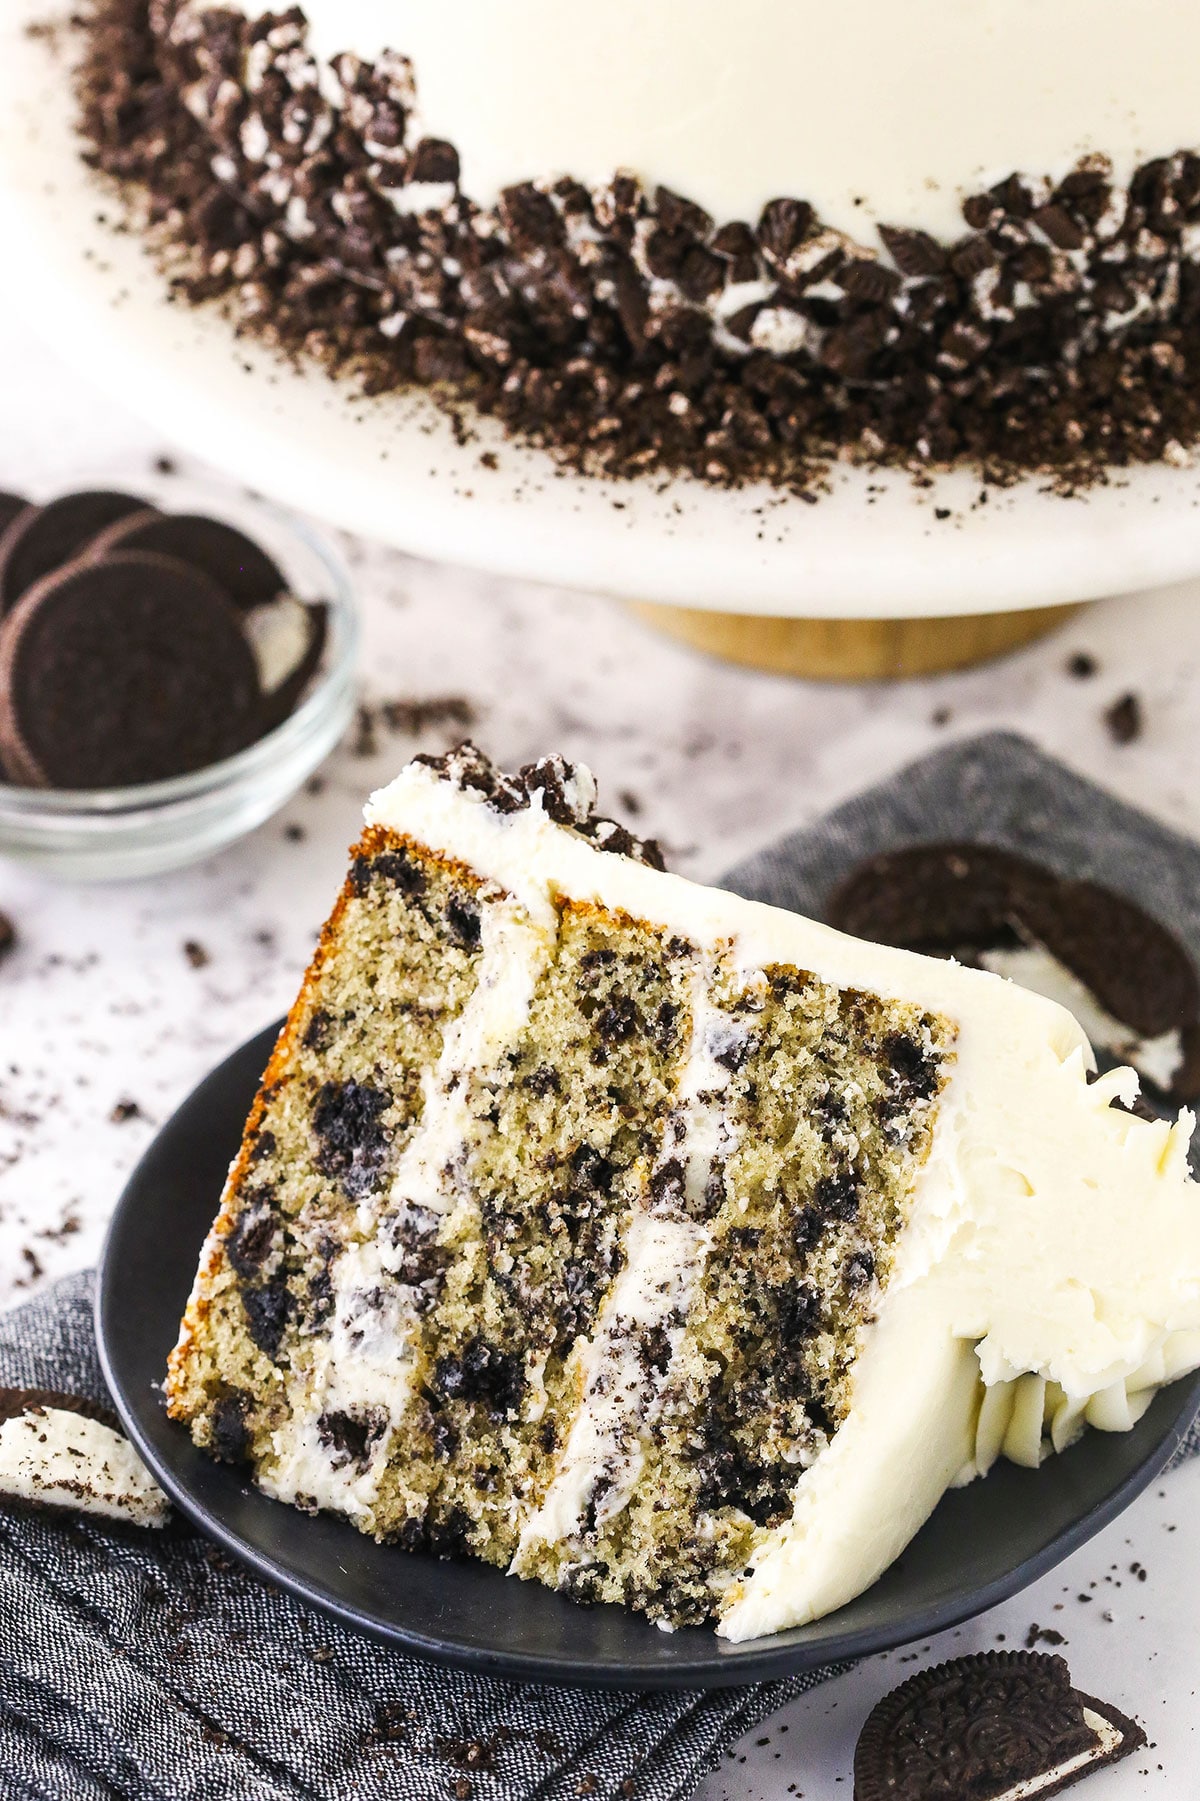 A large slice of cookies and cream layer cake on a black plate with the remaining cake behind it